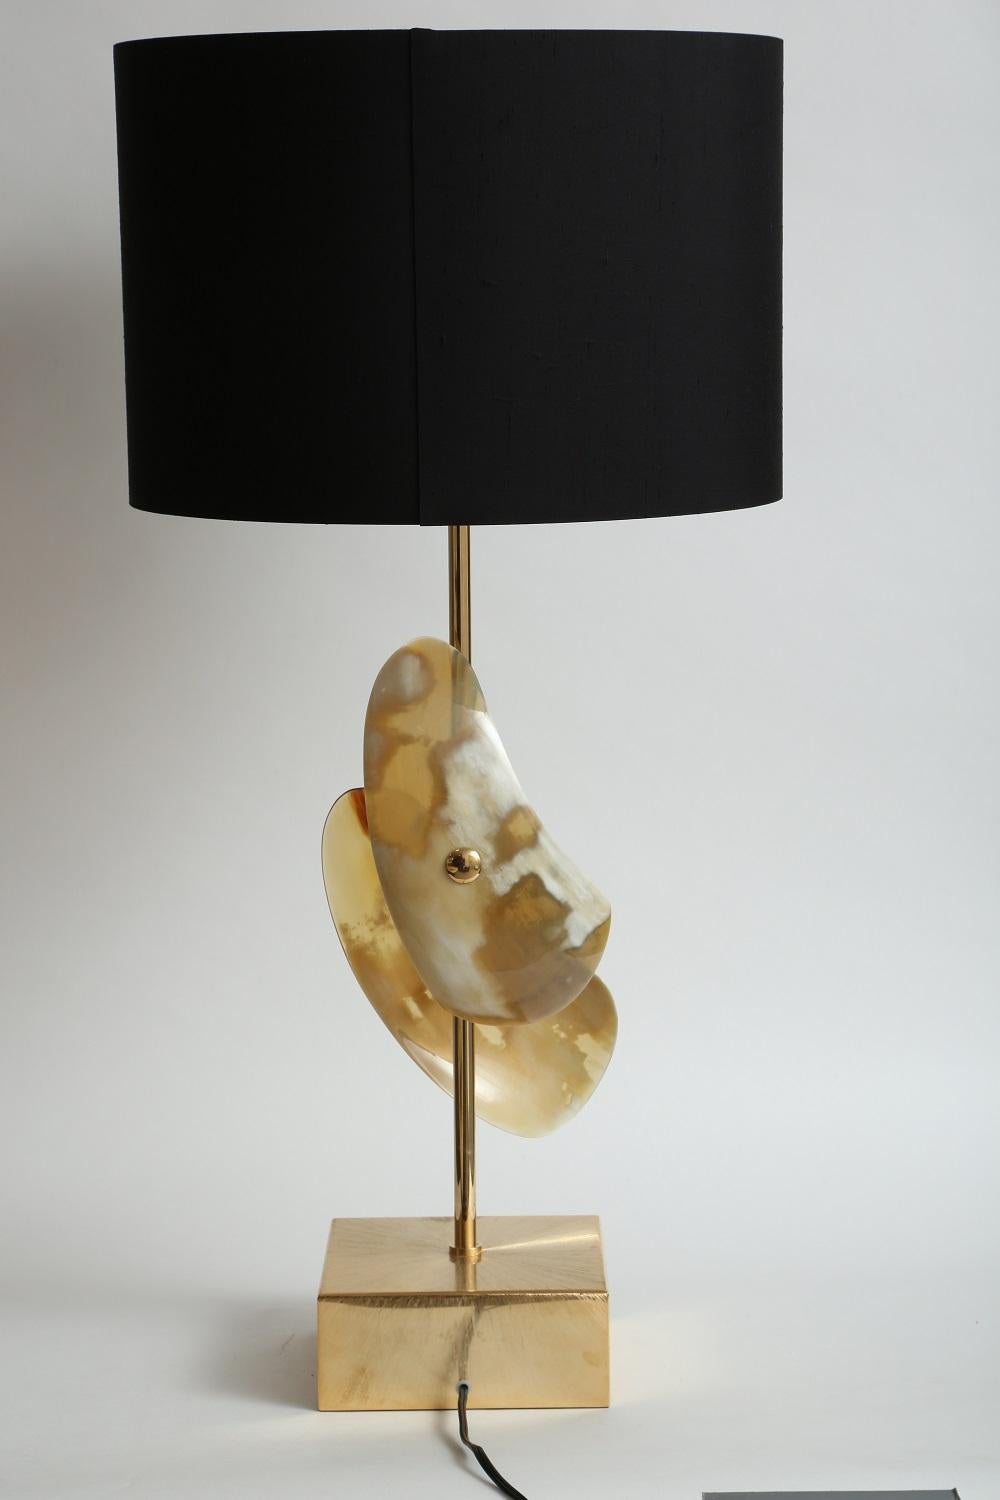 Arcahorn Table Lamp with Horn Details and Brushed Gilded Brass Base For Sale 4